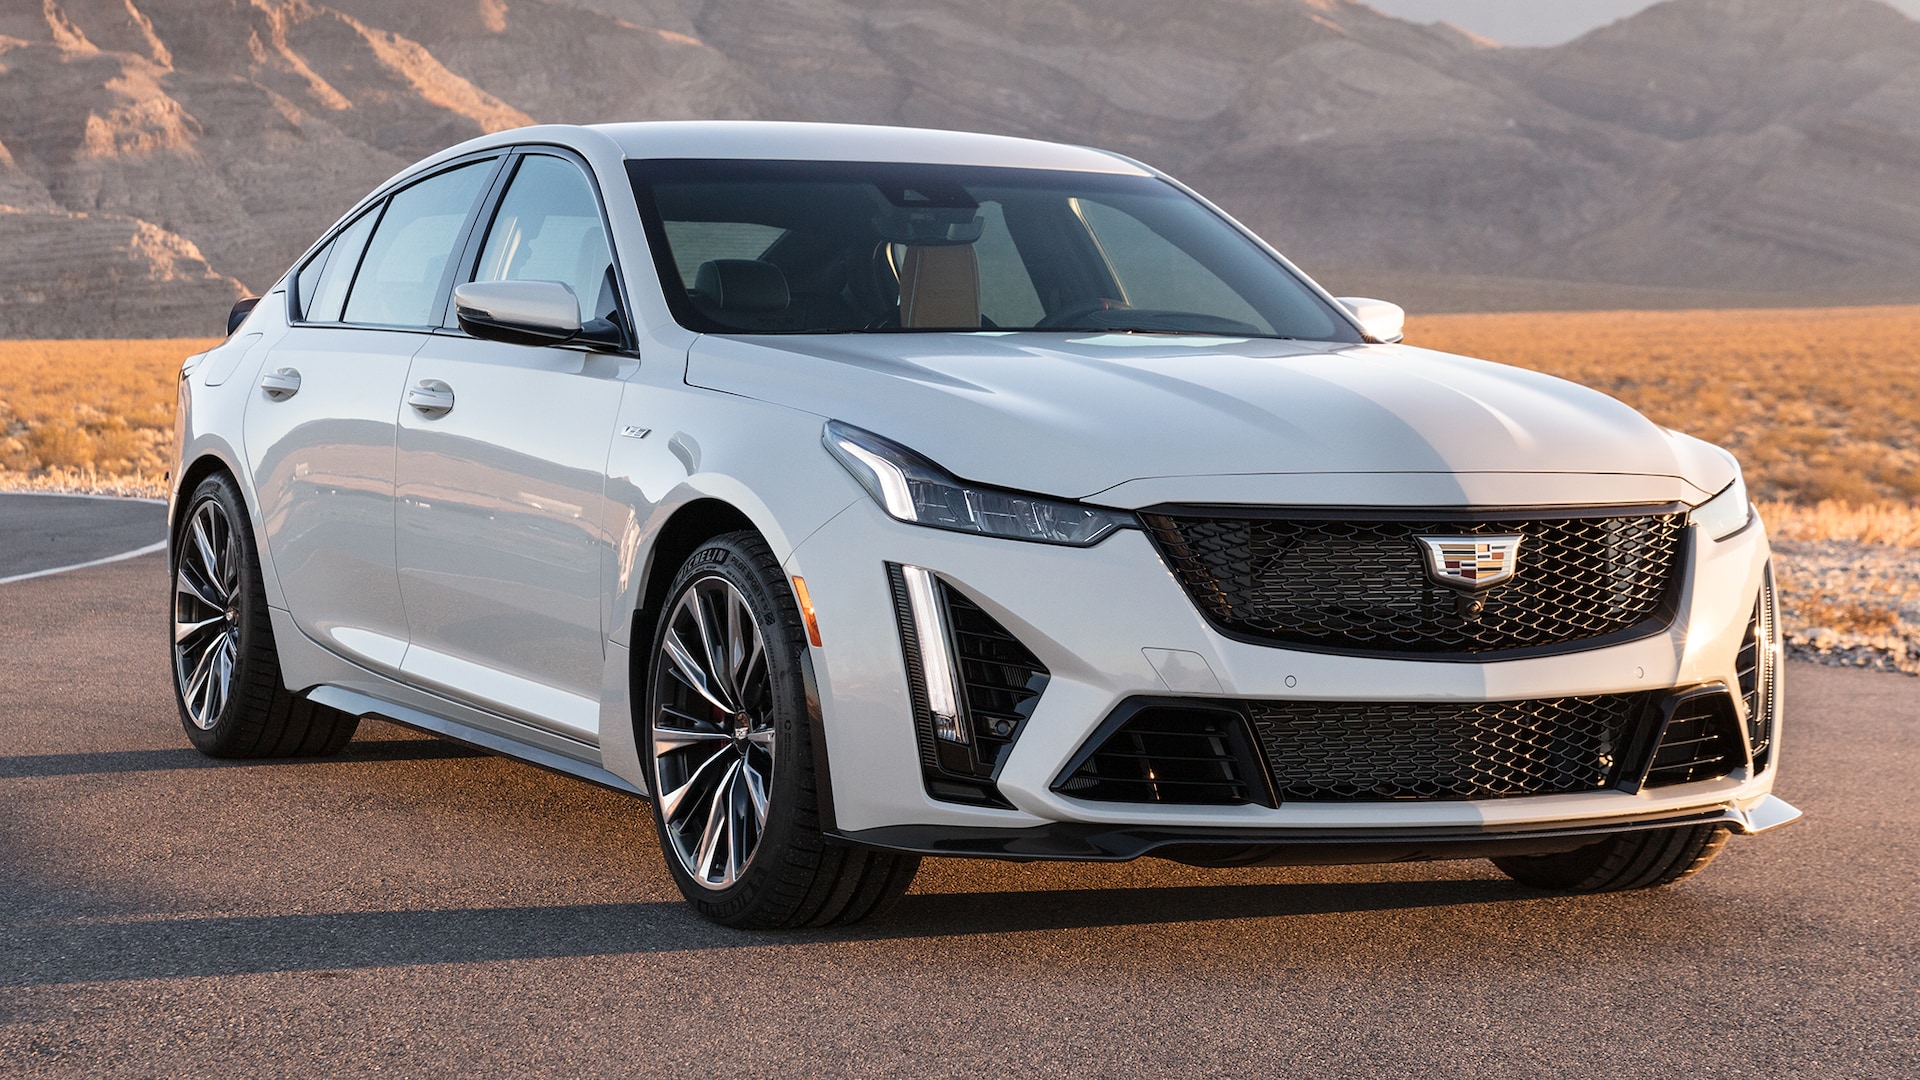 2022 Cadillac CT5 V Blackwing First Look: A 668 HP Monster